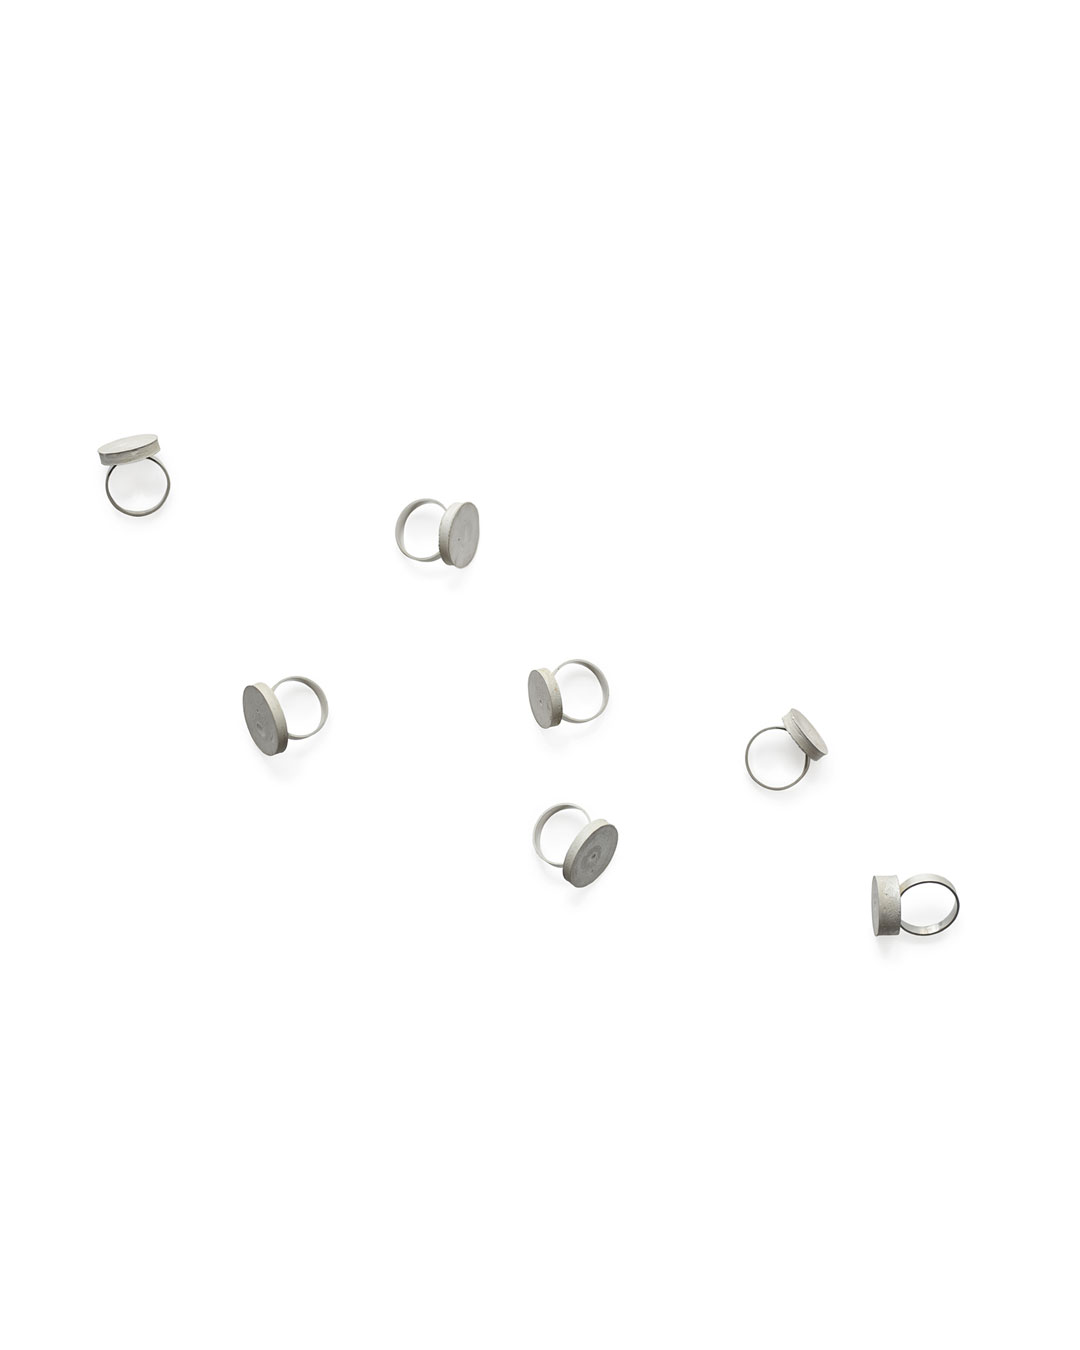 Karin Seufert, untitled, 2018, rings; silver, approximately 42 x 27 x 7 mm, €605 each